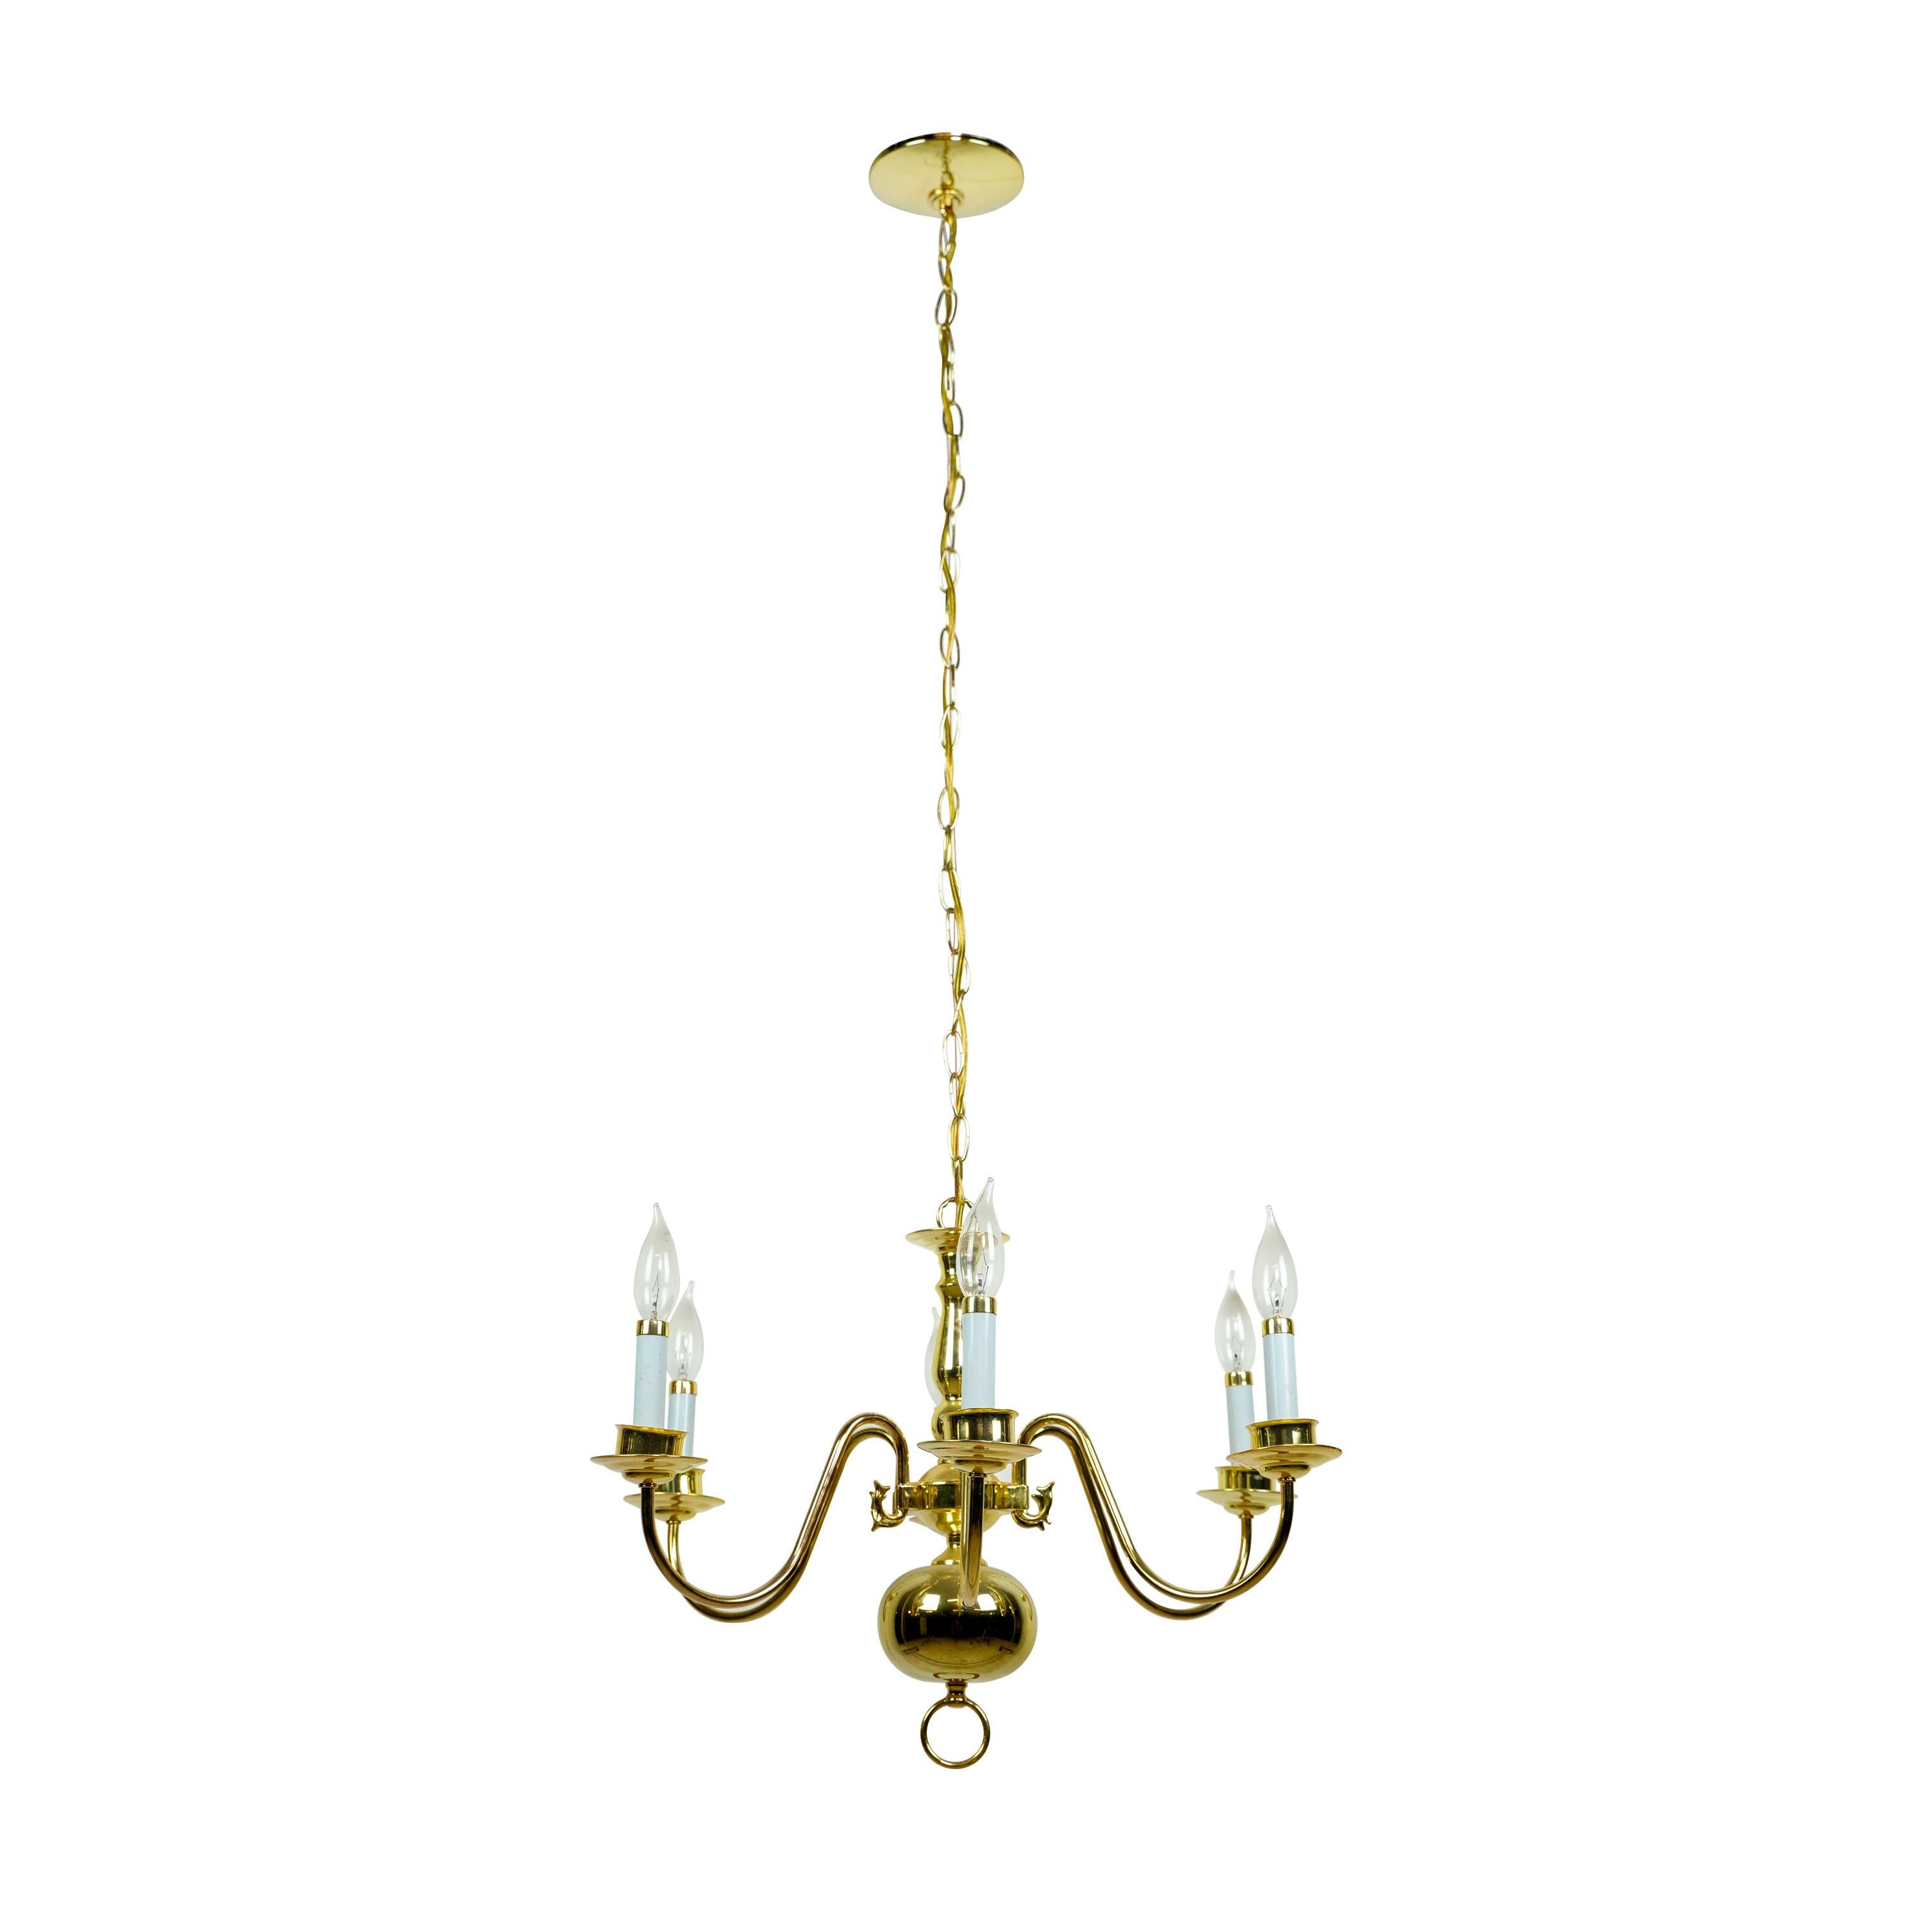 Williamsburg six arm steel chandelier with a polished brass finish. Cleaned and restored. Please note, this item is located in our Scranton, PA location.